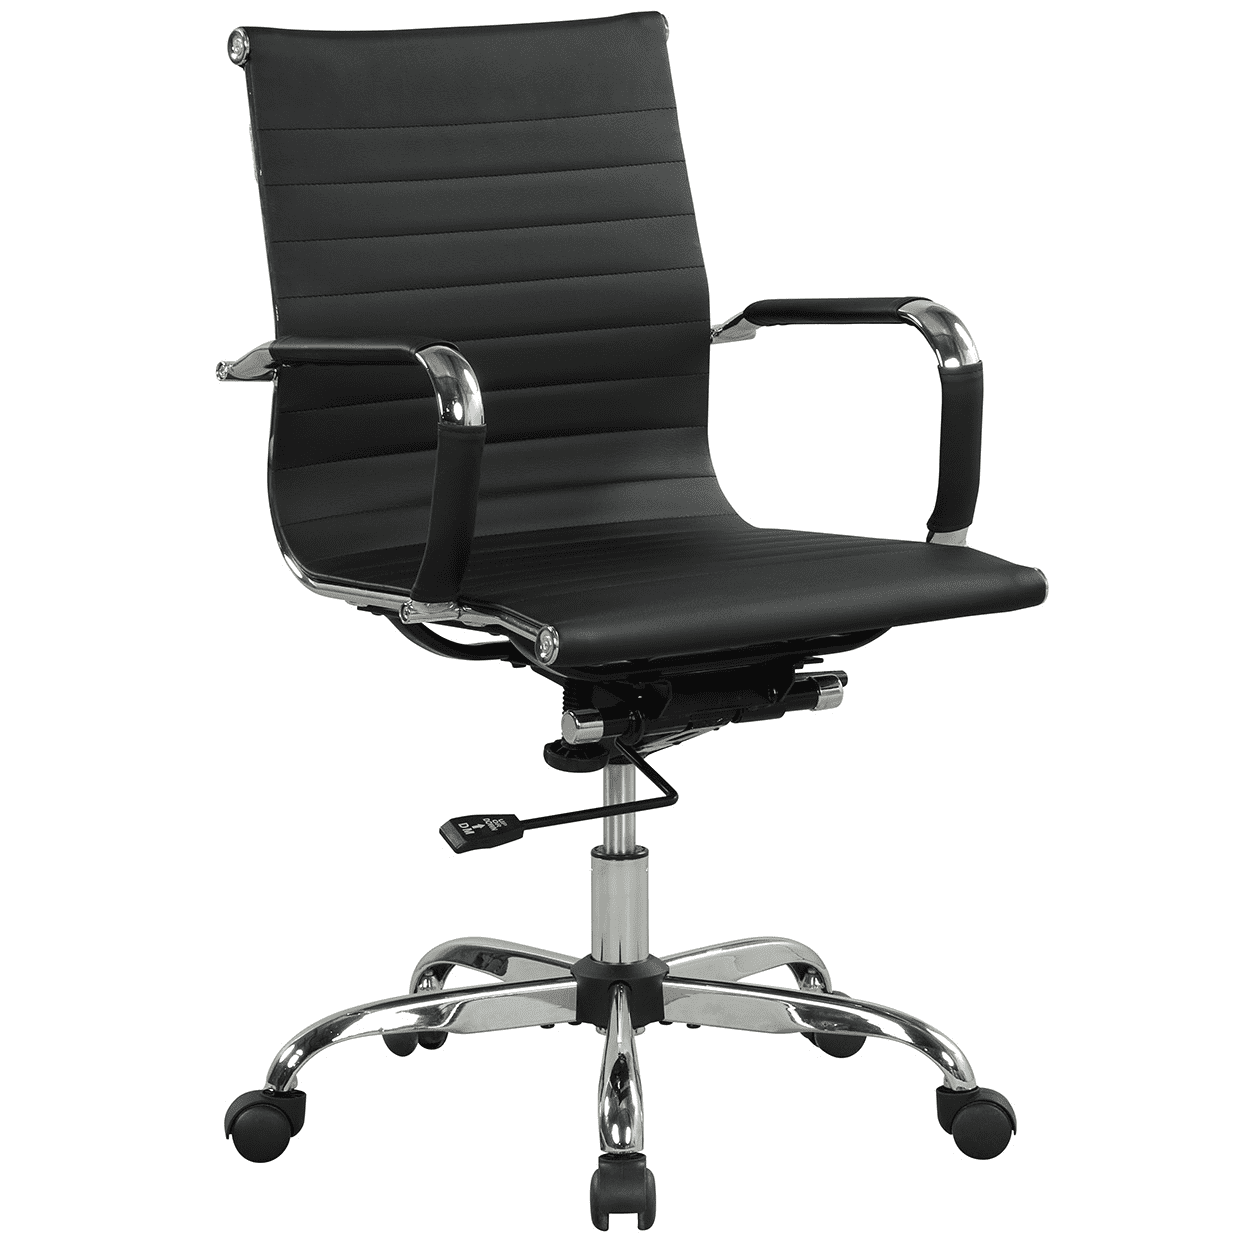 Leather Office Chair - Lifestyle Bravo